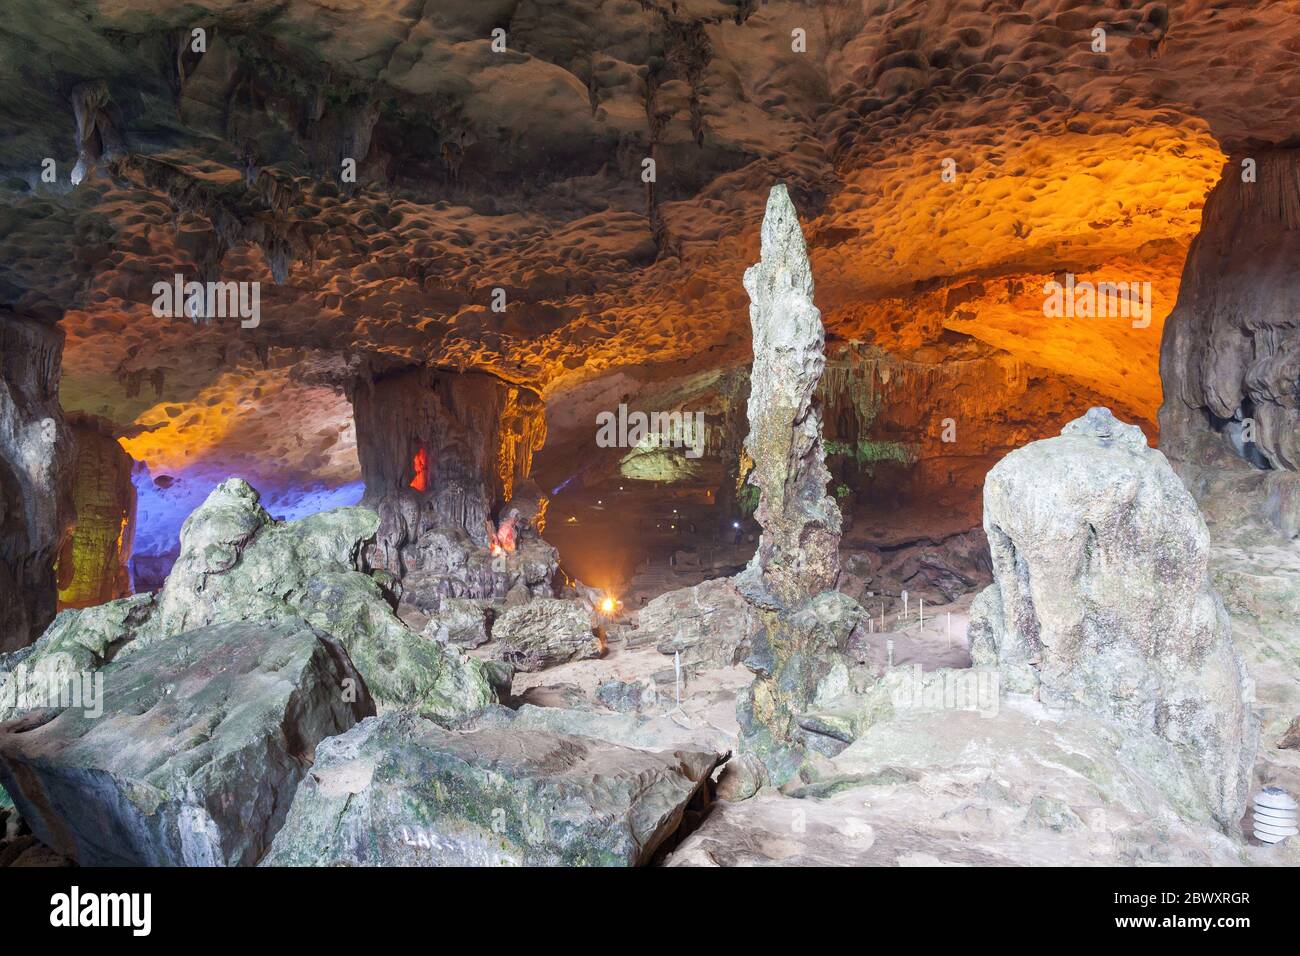 Stalactite and stalagmite formations in a limestone cave of Halong Bay, Vietnam Stock Photo